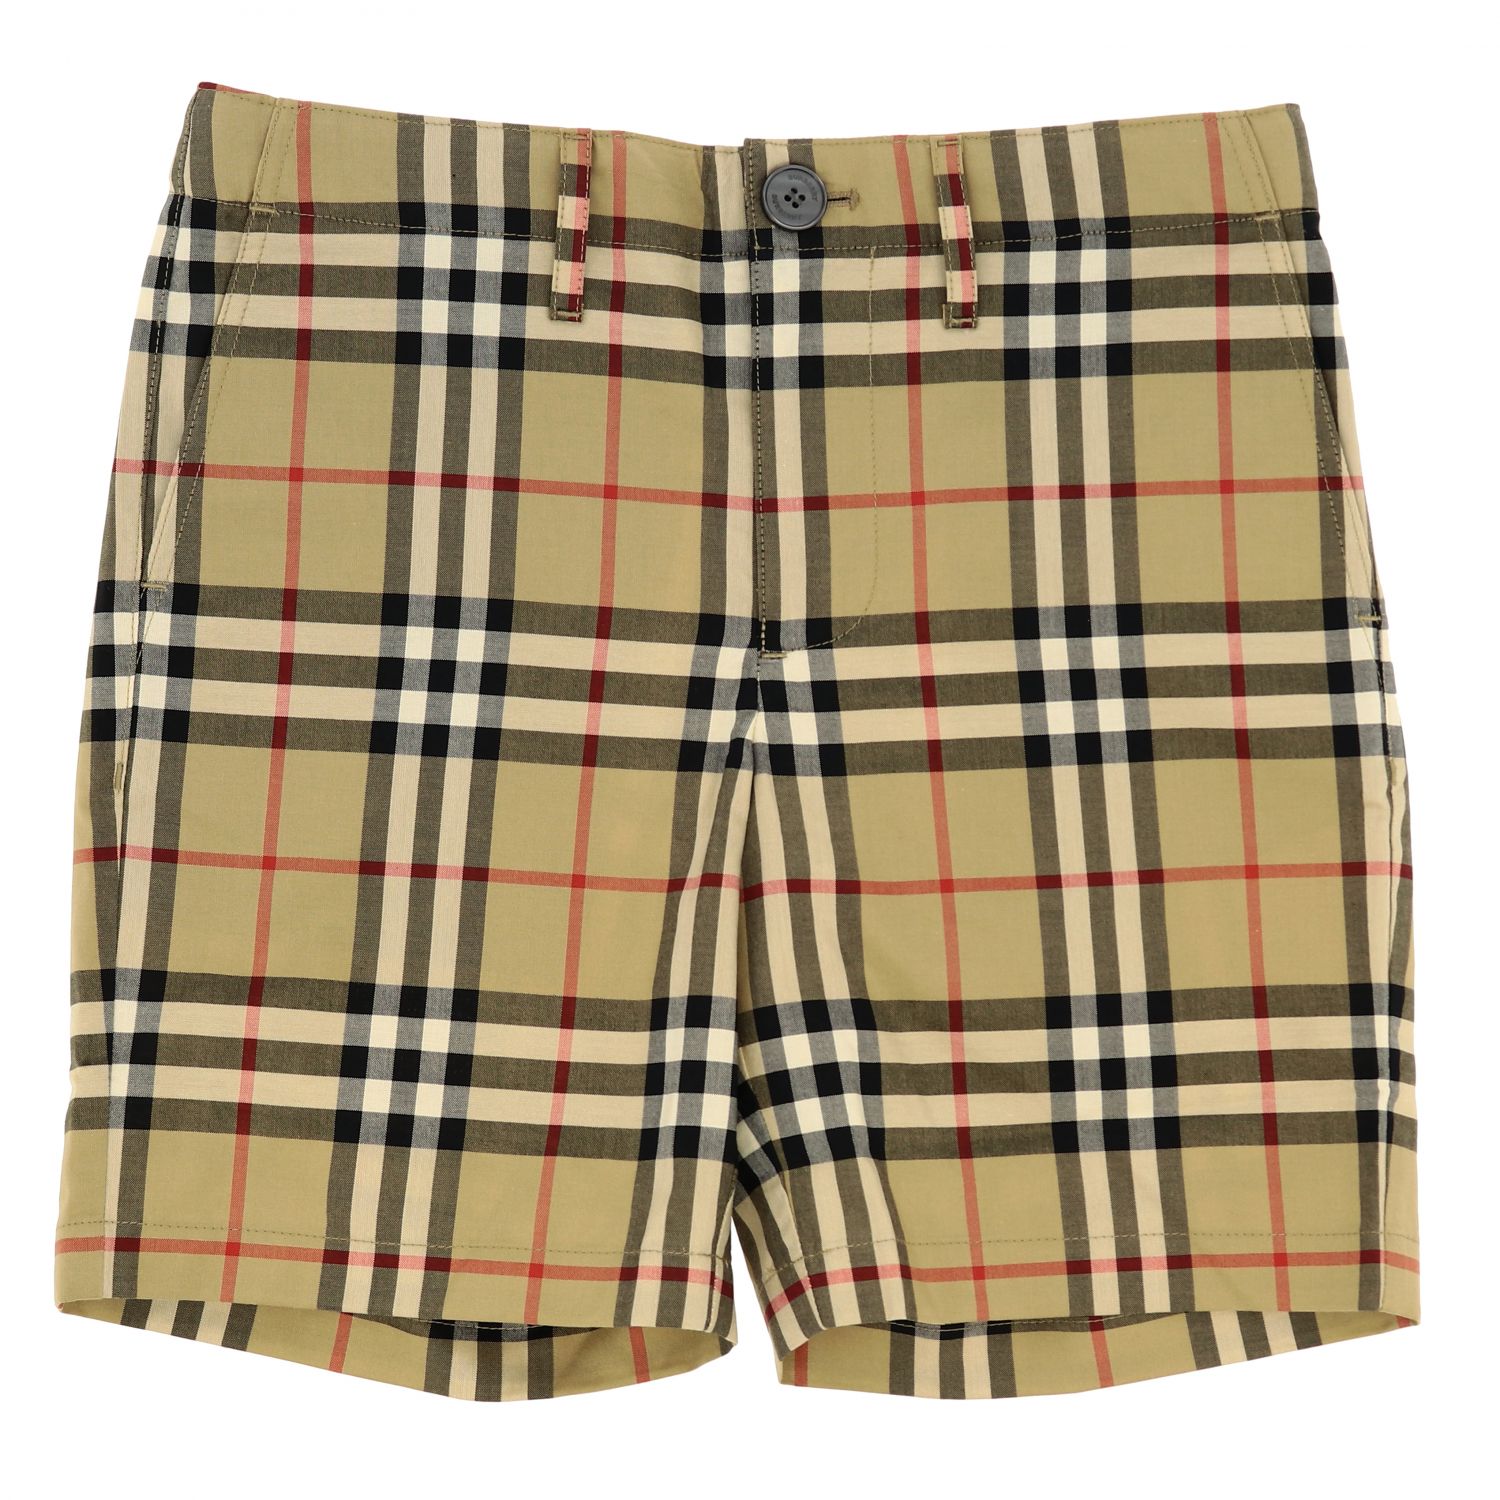 Burberry Outlet: shorts in cotton with vintage check pattern | Shorts